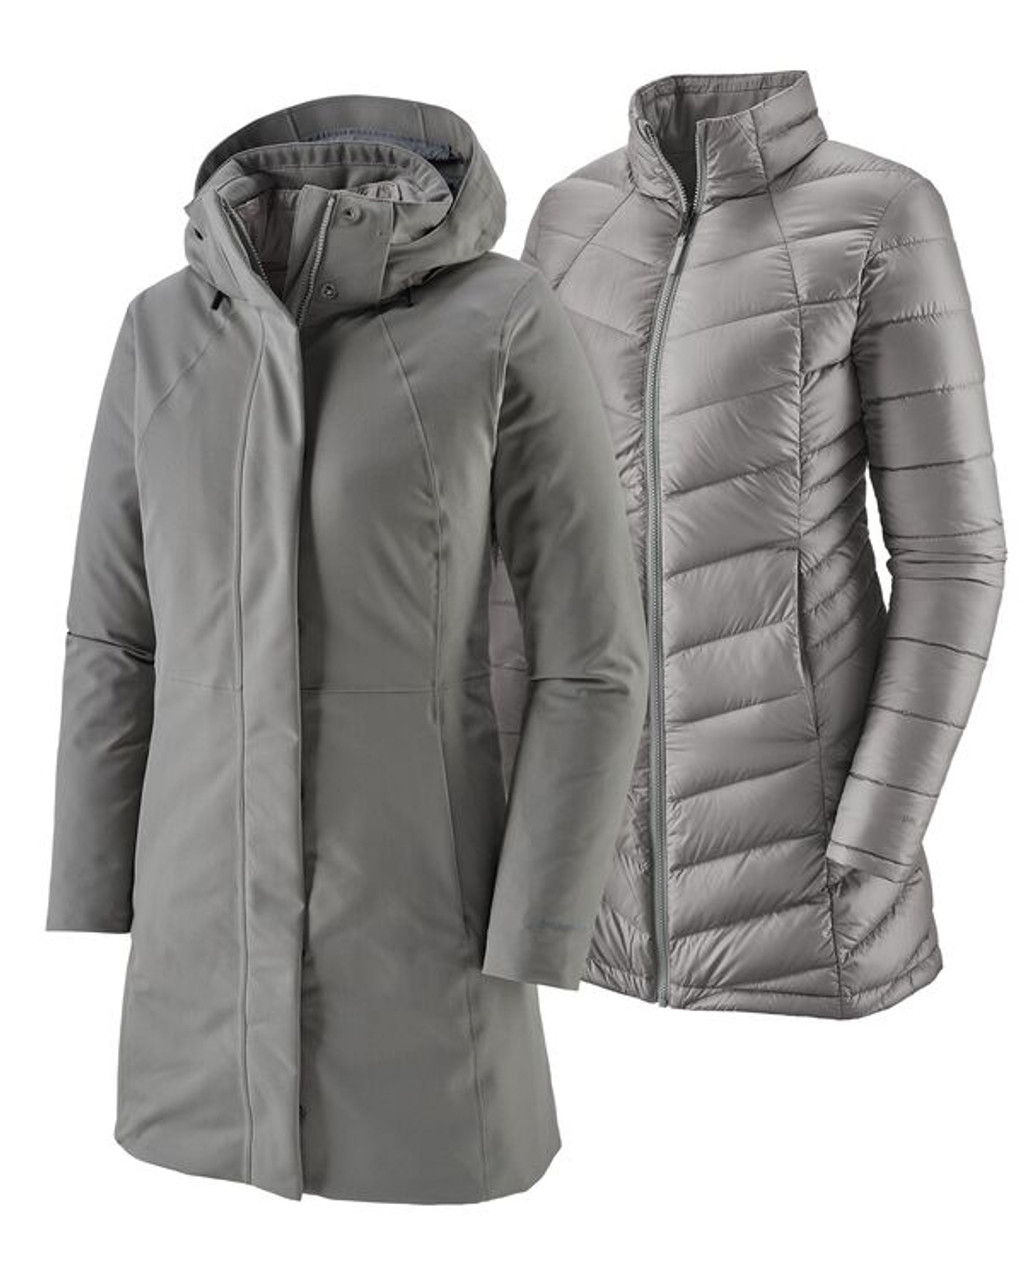 Patagonia Tres 3-in-1 Parka - Women's Review